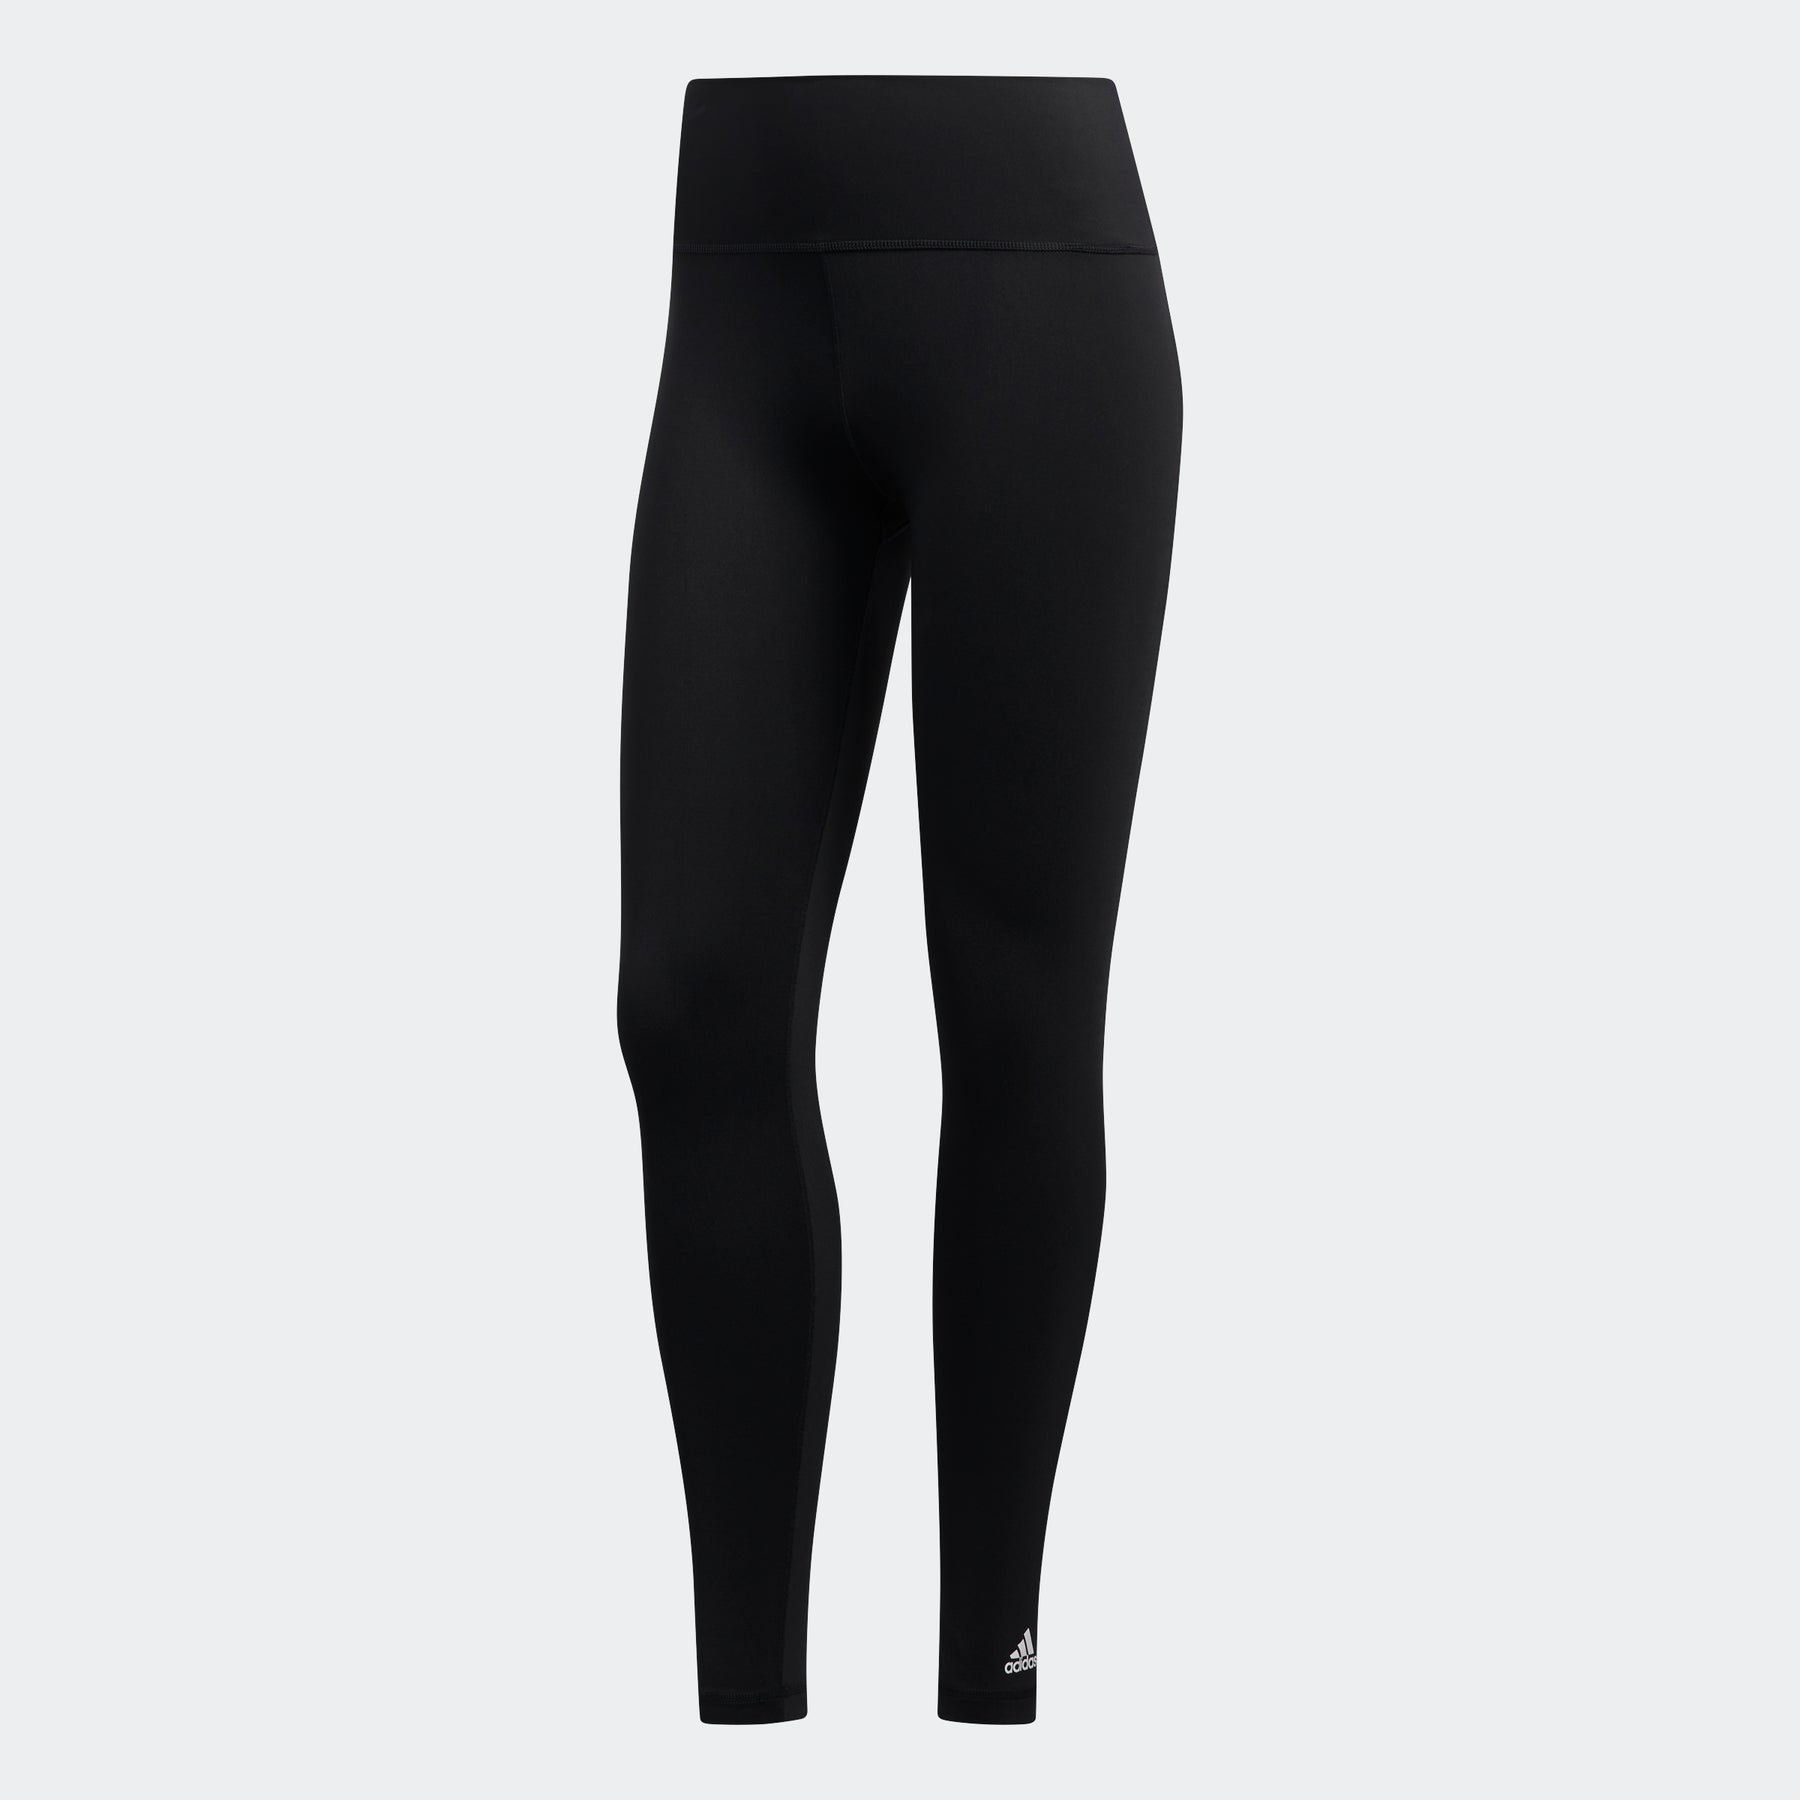 Adidas Own The Run Primeblue Tights Women's Large